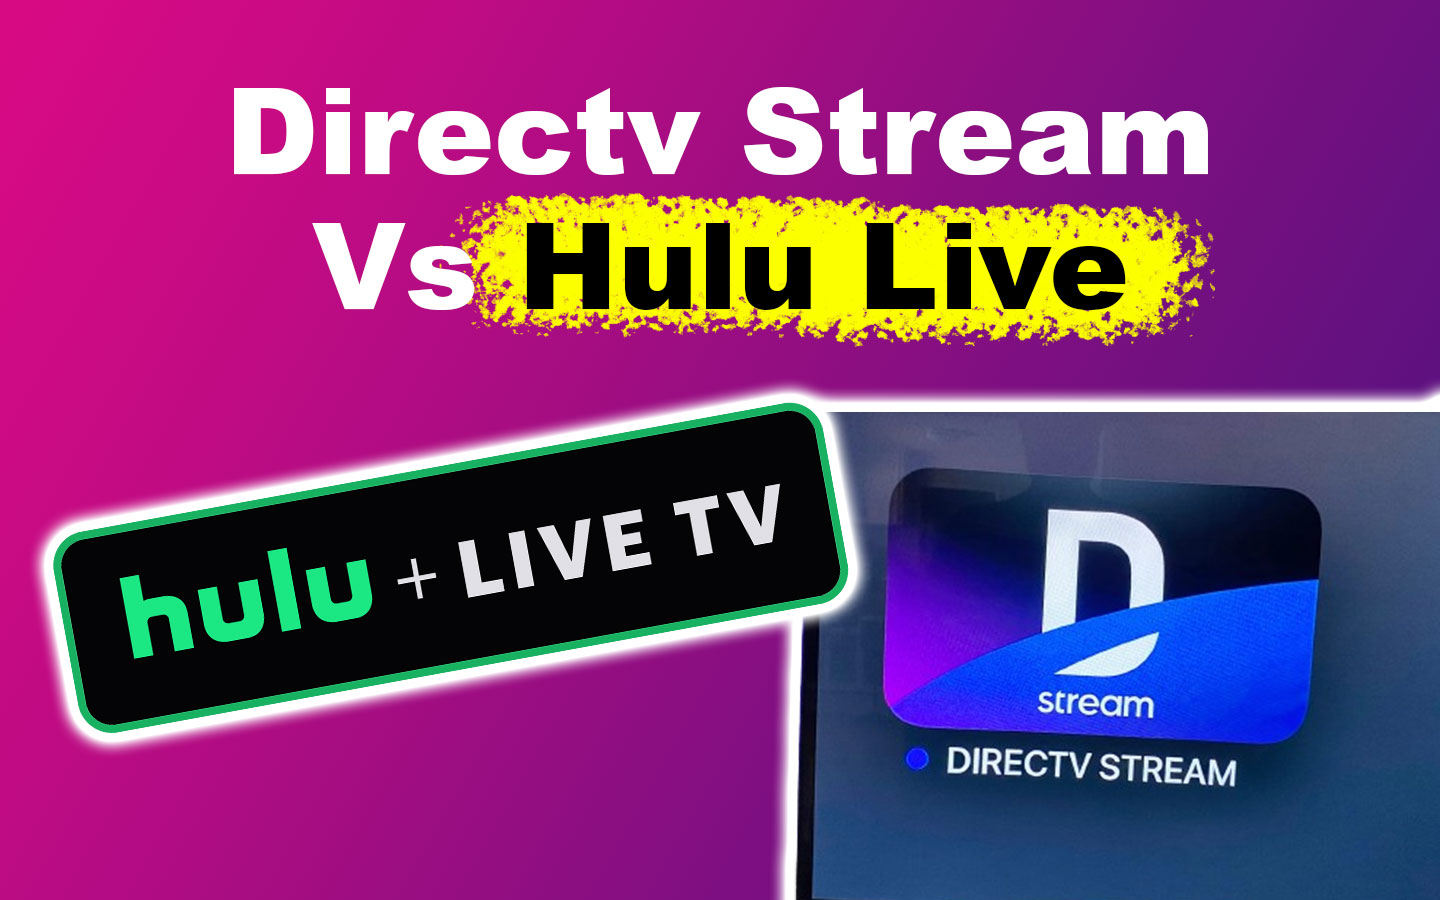 Comparing Directv Stream and Hulu Live [Which Is Better?]